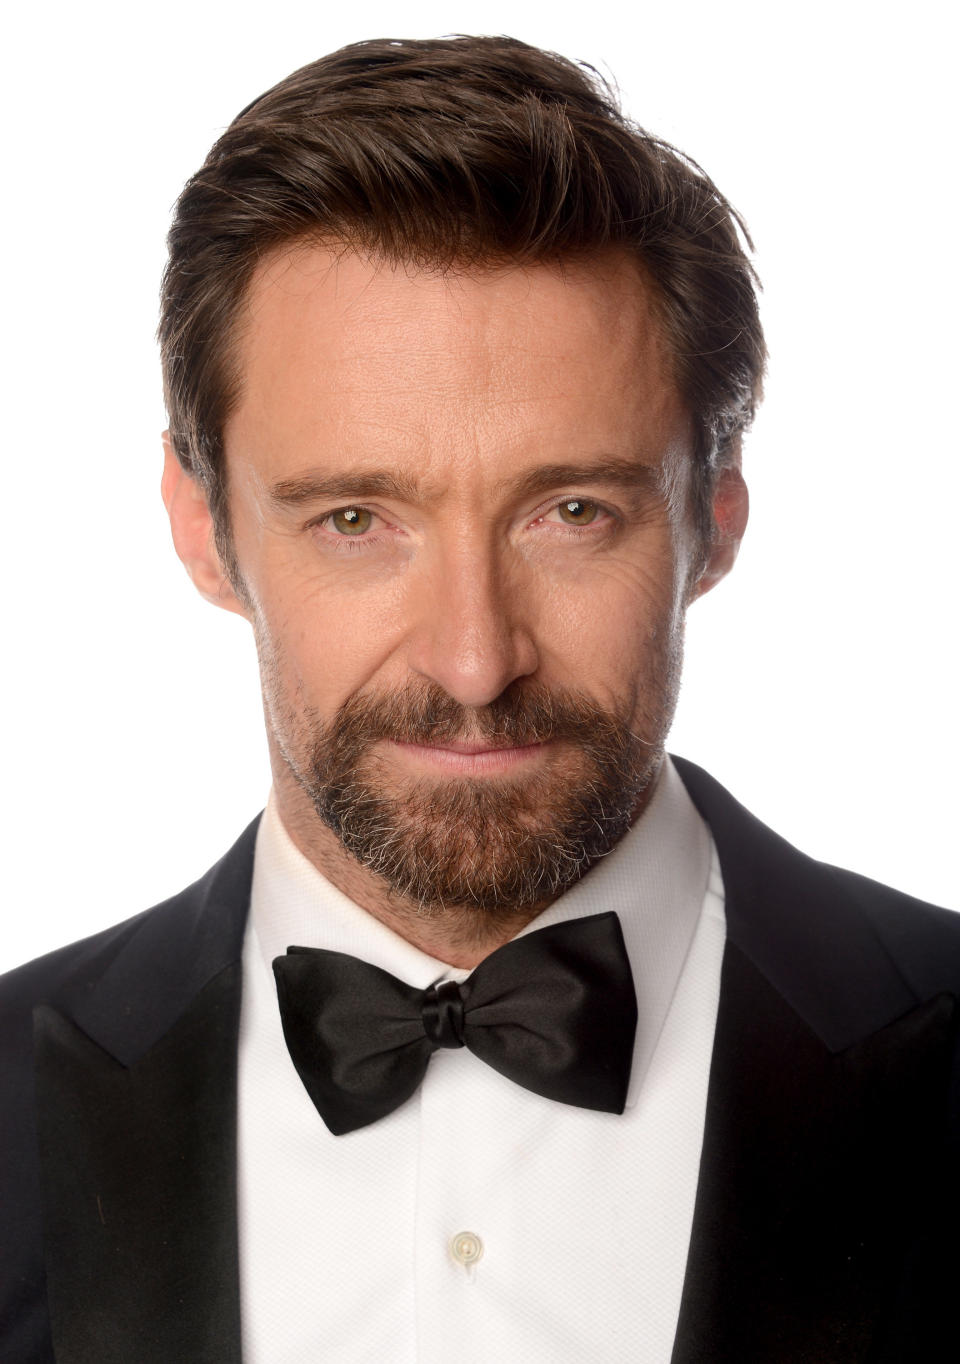 BEVERLY HILLS, CA - JANUARY 13:  Actor Hugh Jackman, winner of the Best Performance by an Actor in a Motion Picture - Comedy Or Musical Award for 'Les Miserables' poses for a portrait at the 70th Annual Golden Globe Awards held at The Beverly Hilton Hotel on January 13, 2013 in Beverly Hills, California.  (Photo by Dimitrios Kambouris/Getty Images)